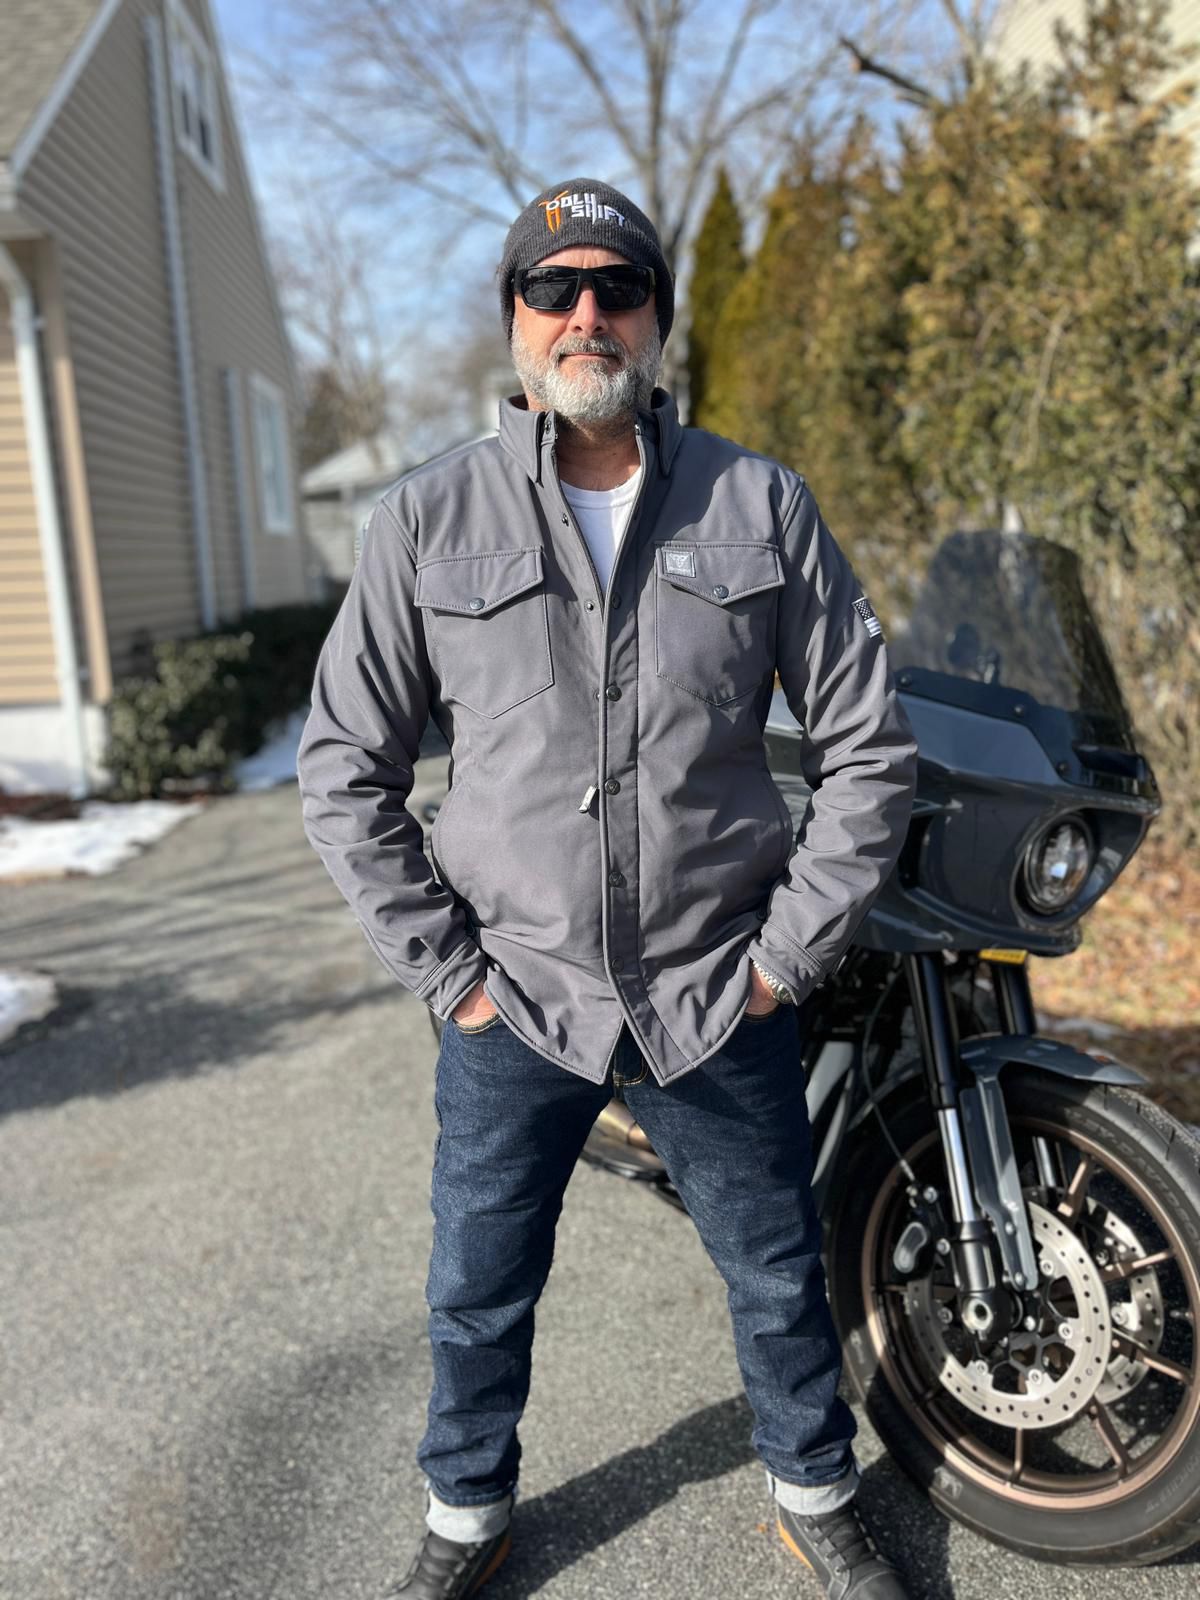 Rider-In-Protective-Gray-Jacket-On-Background-Of-Motorcycle